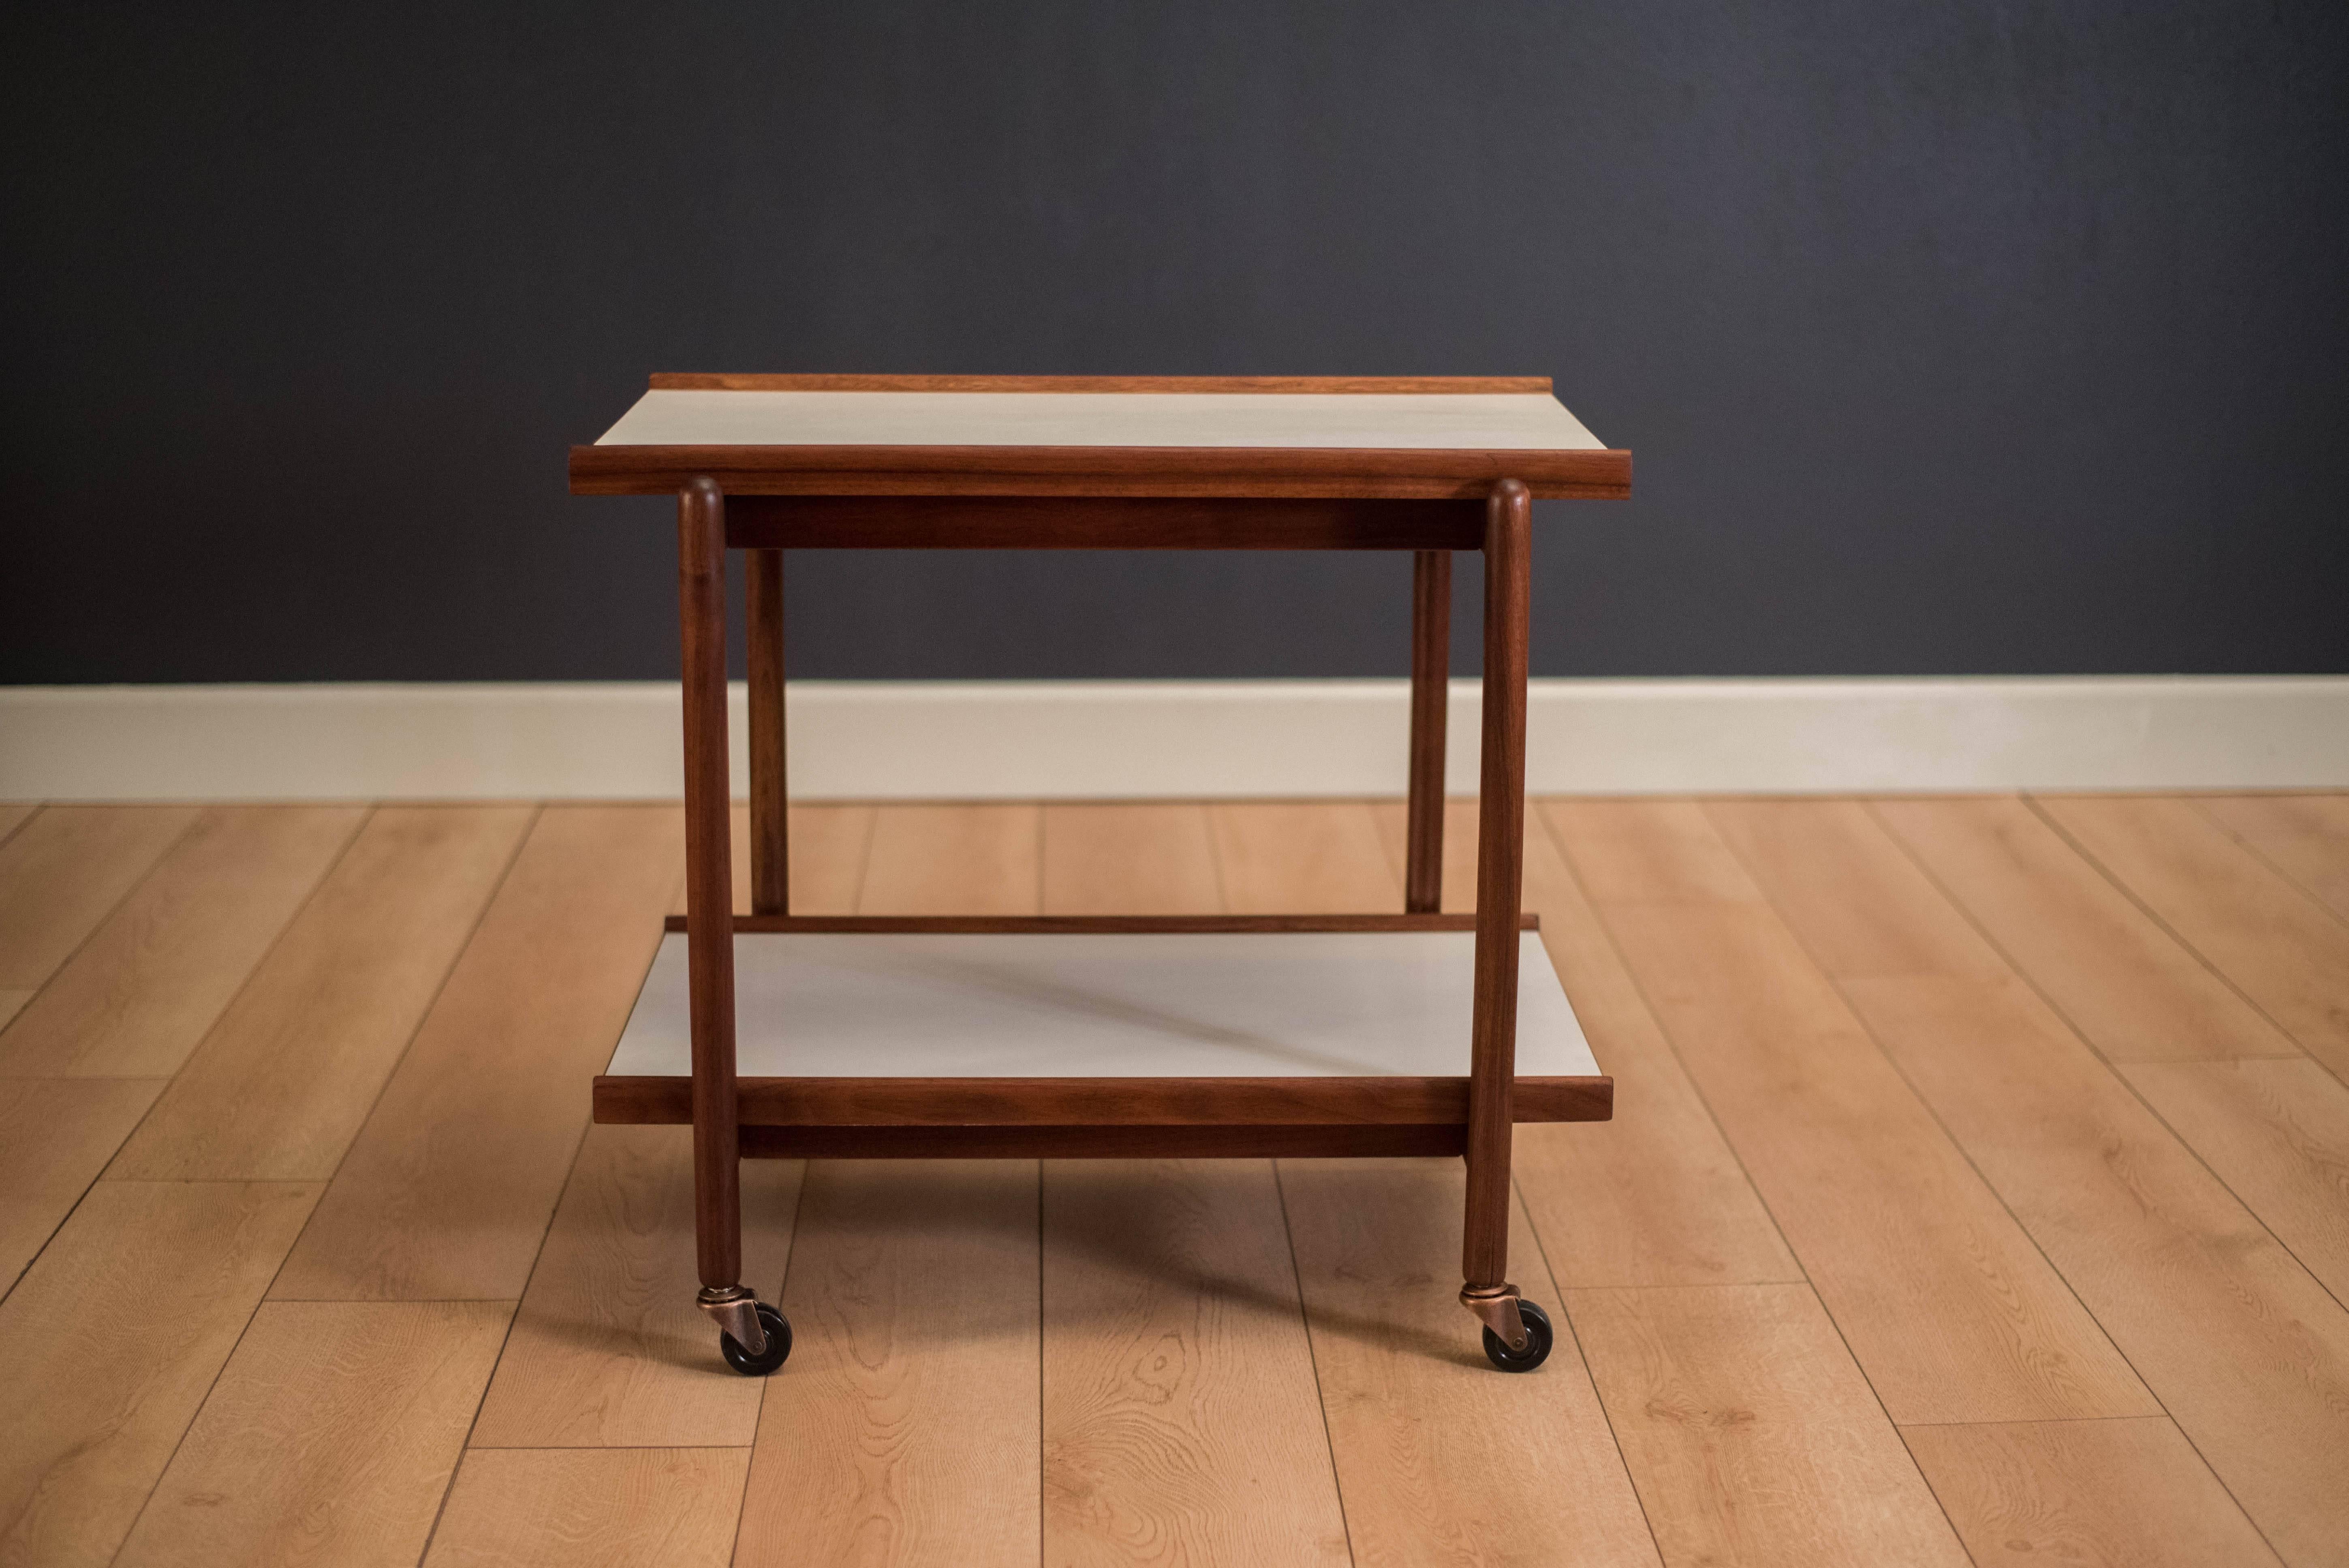 Vintage two-tier rolling bar cart in walnut, circa 1960s. This serving cart includes a raised edge design with white laminate trays for easy maintenance. Bottom tray is removable.